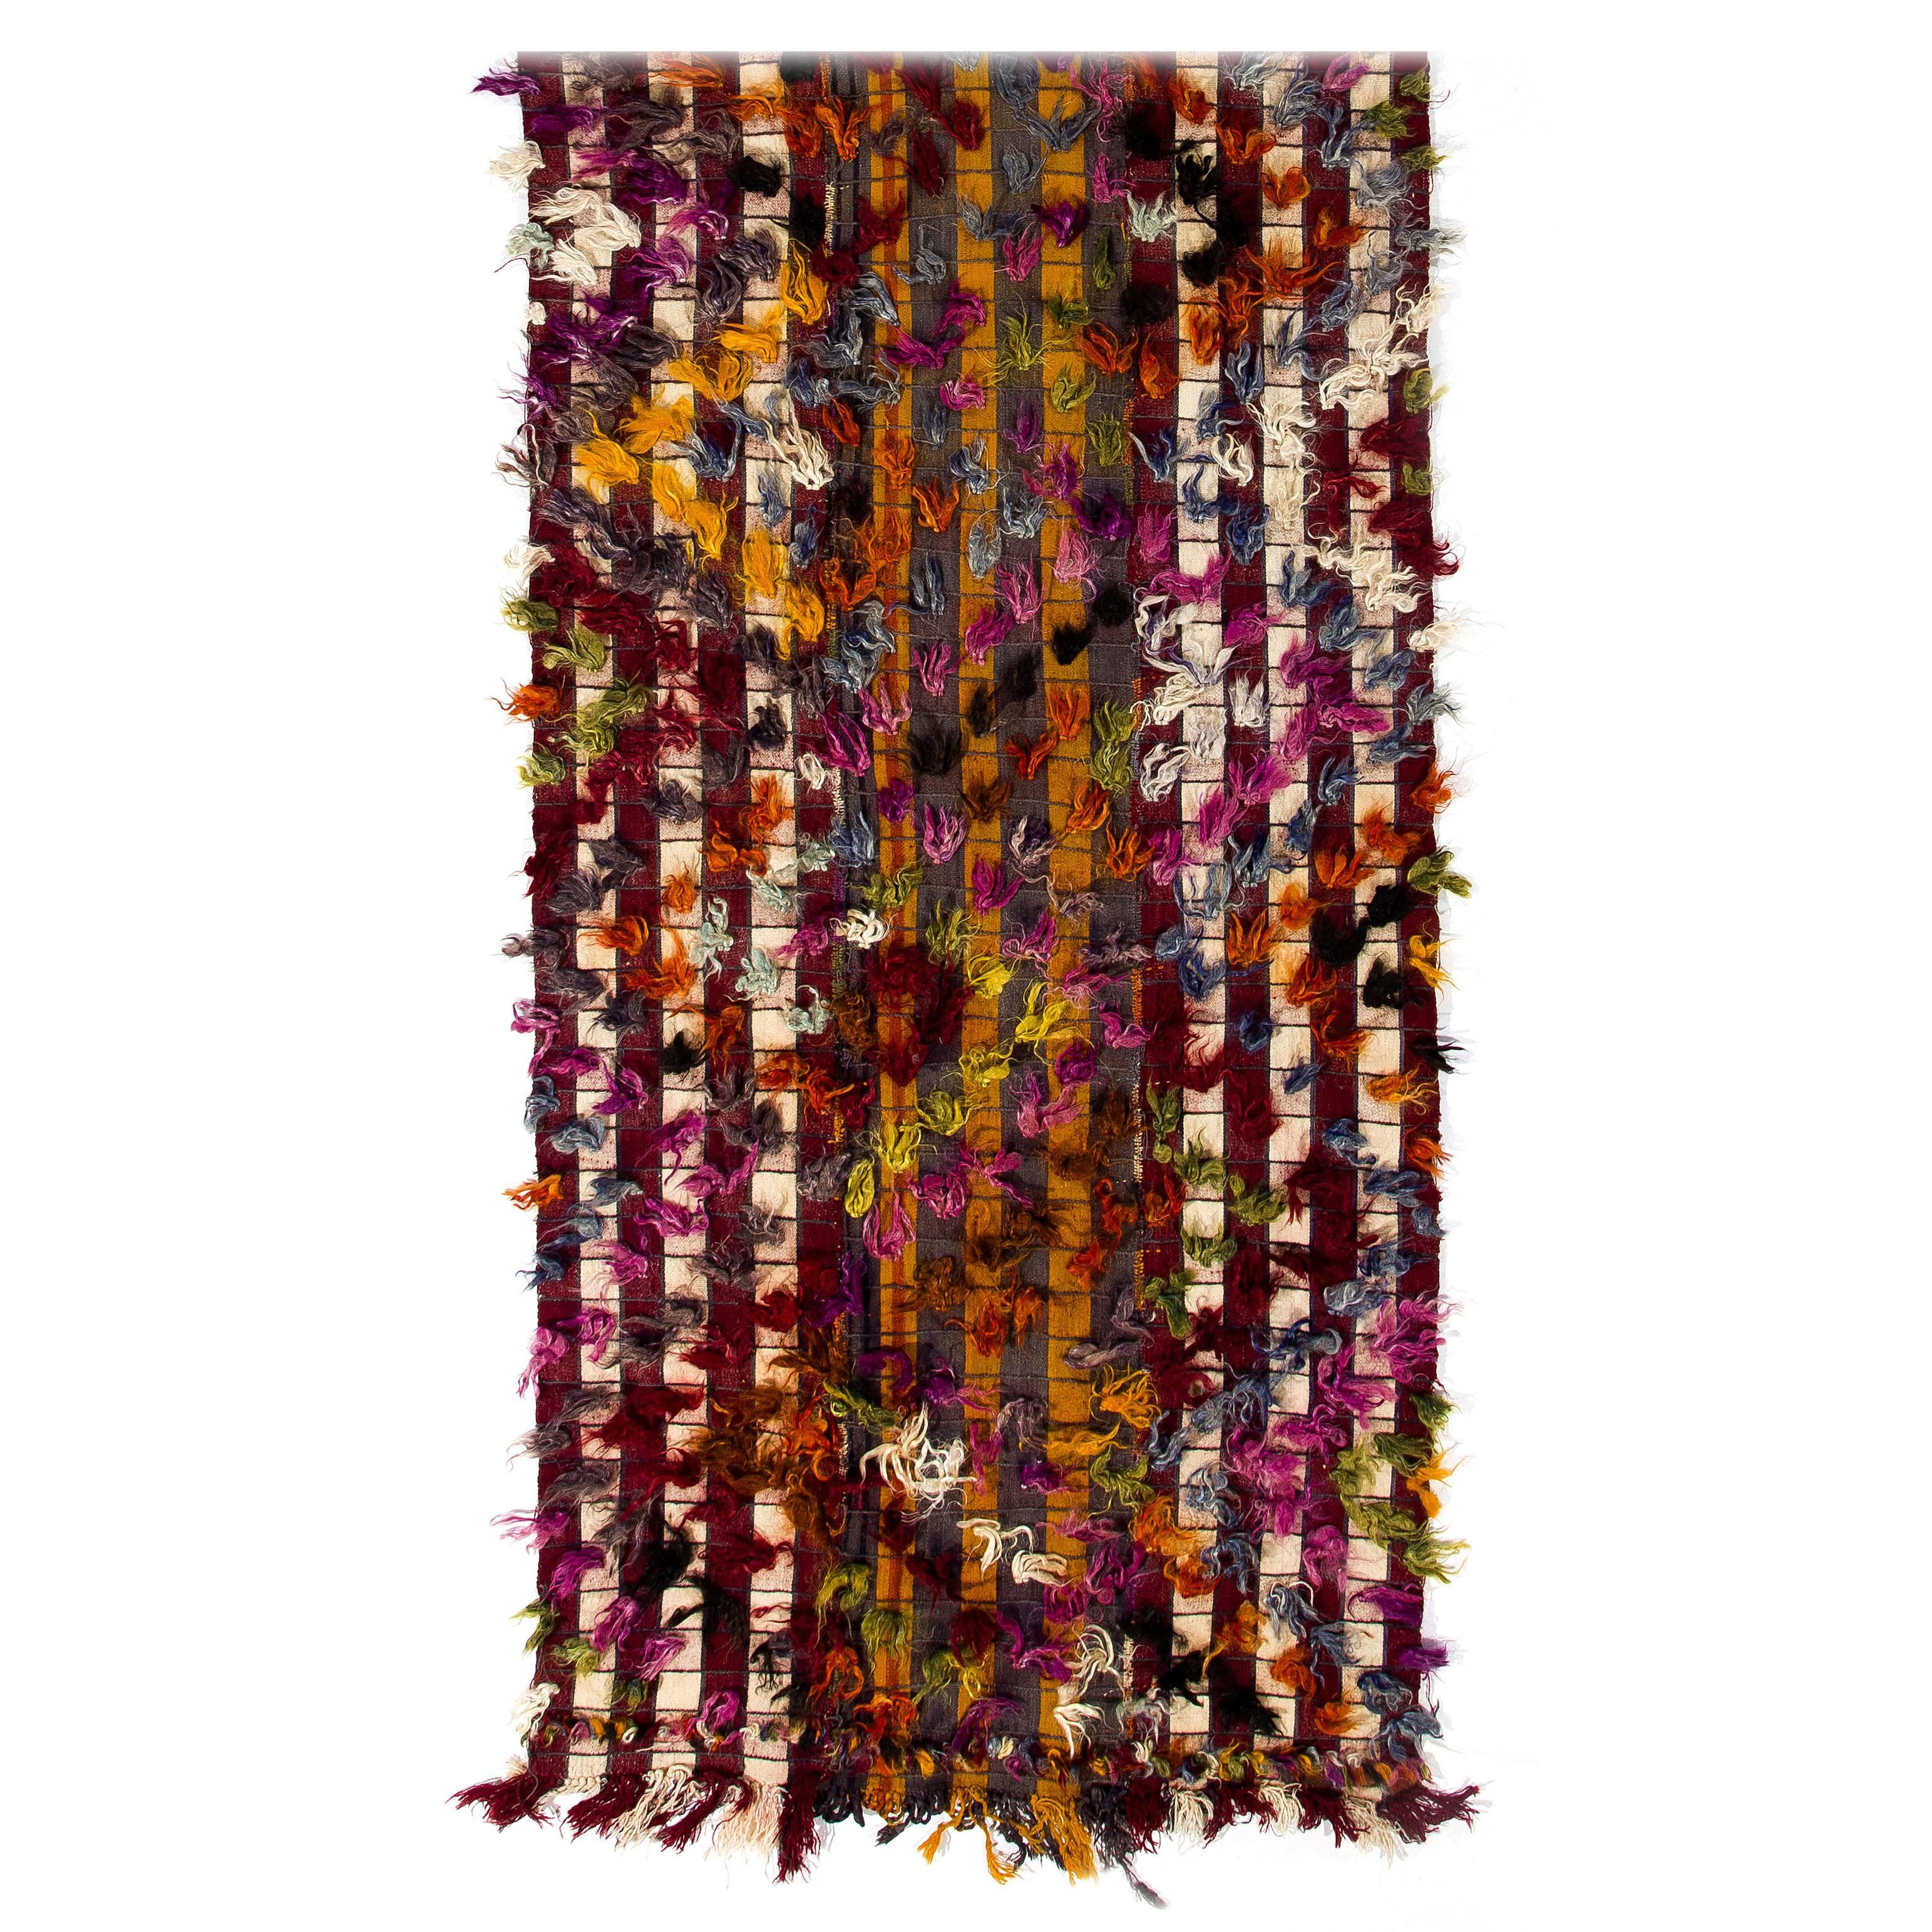 This lively handwoven rug was produced by Kurdish villagers in Central Turkey for daily use in third quarter of the 20th century. These splendid vintage weavings were used in various ways such as wall-hangings, bedding covers, tent dividers,